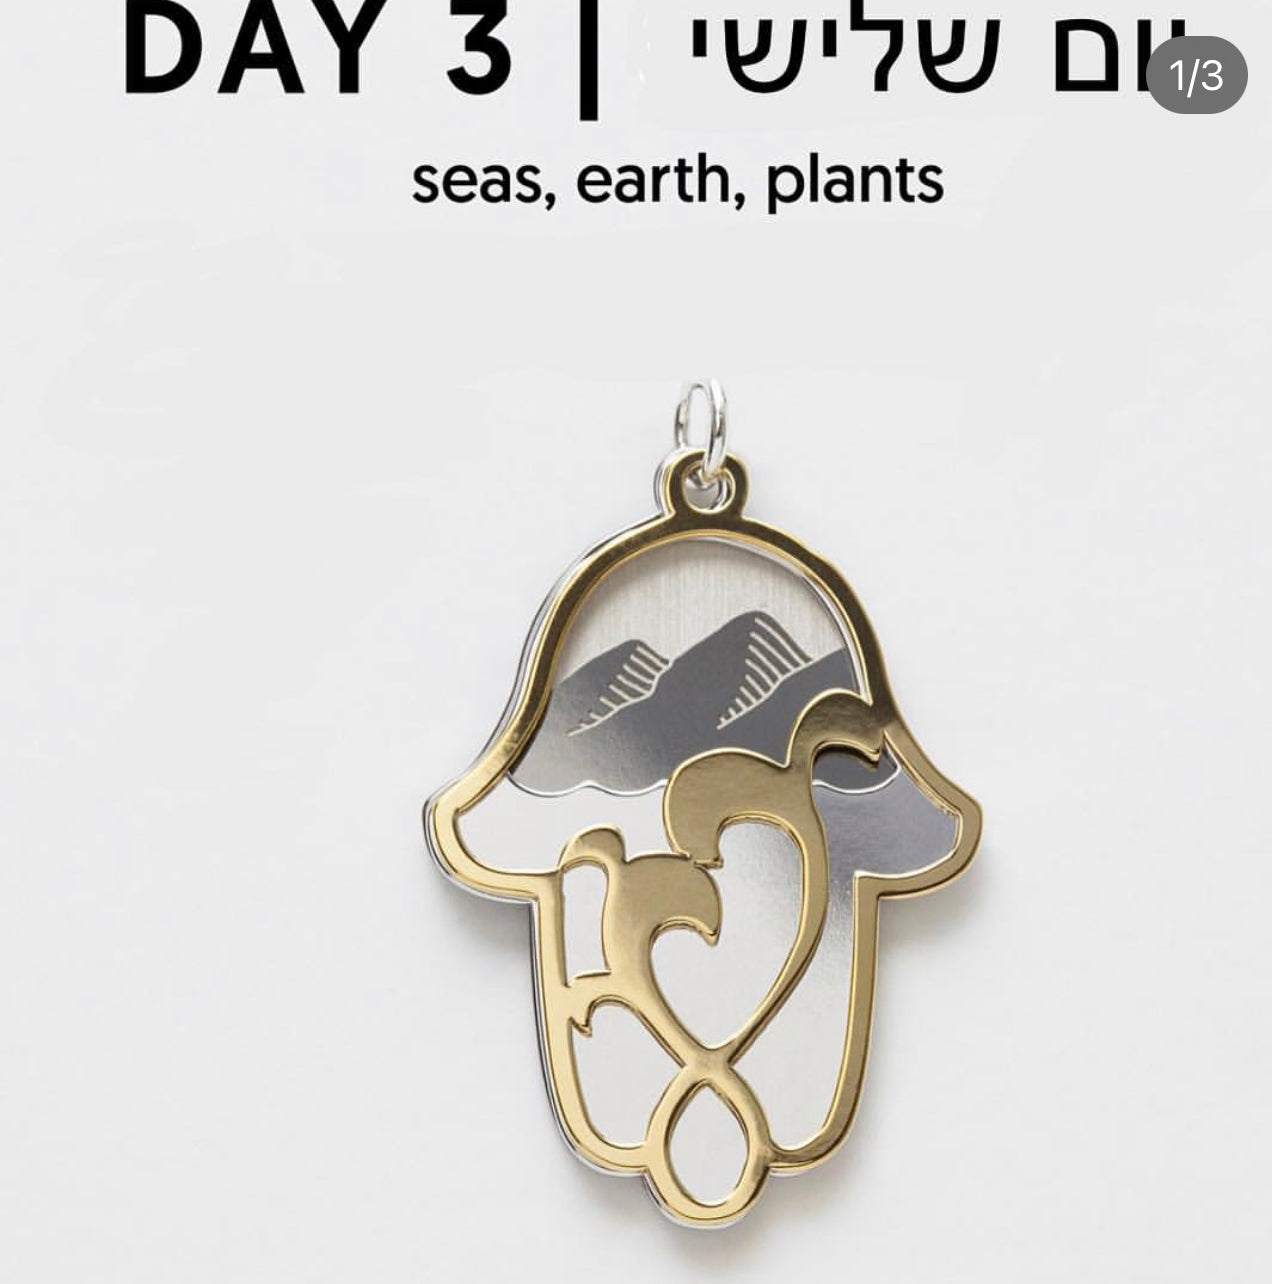 Days of Creation Pendant - Day 3